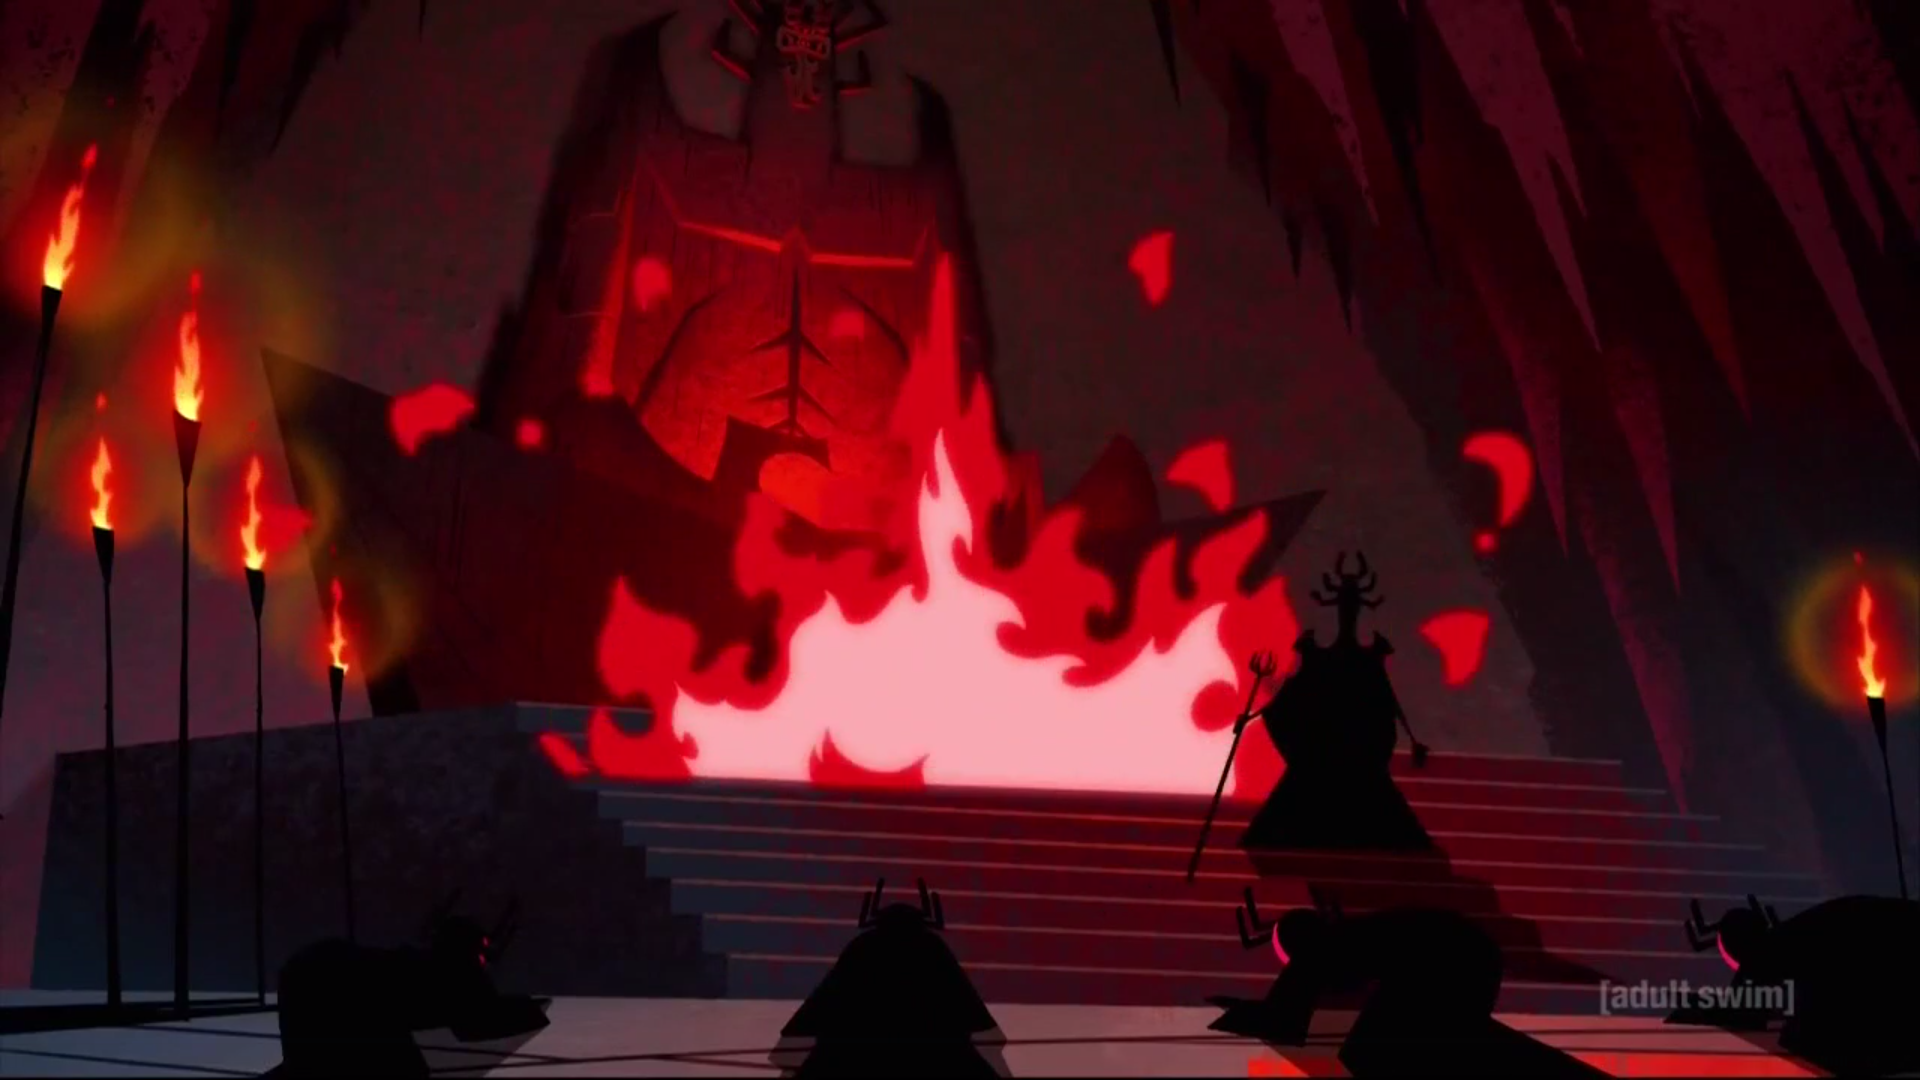 Image Aku Enter Cult Png Samurai Jack Wiki Fandom Powered By Wikia | Free  Hot Nude Porn Pic Gallery